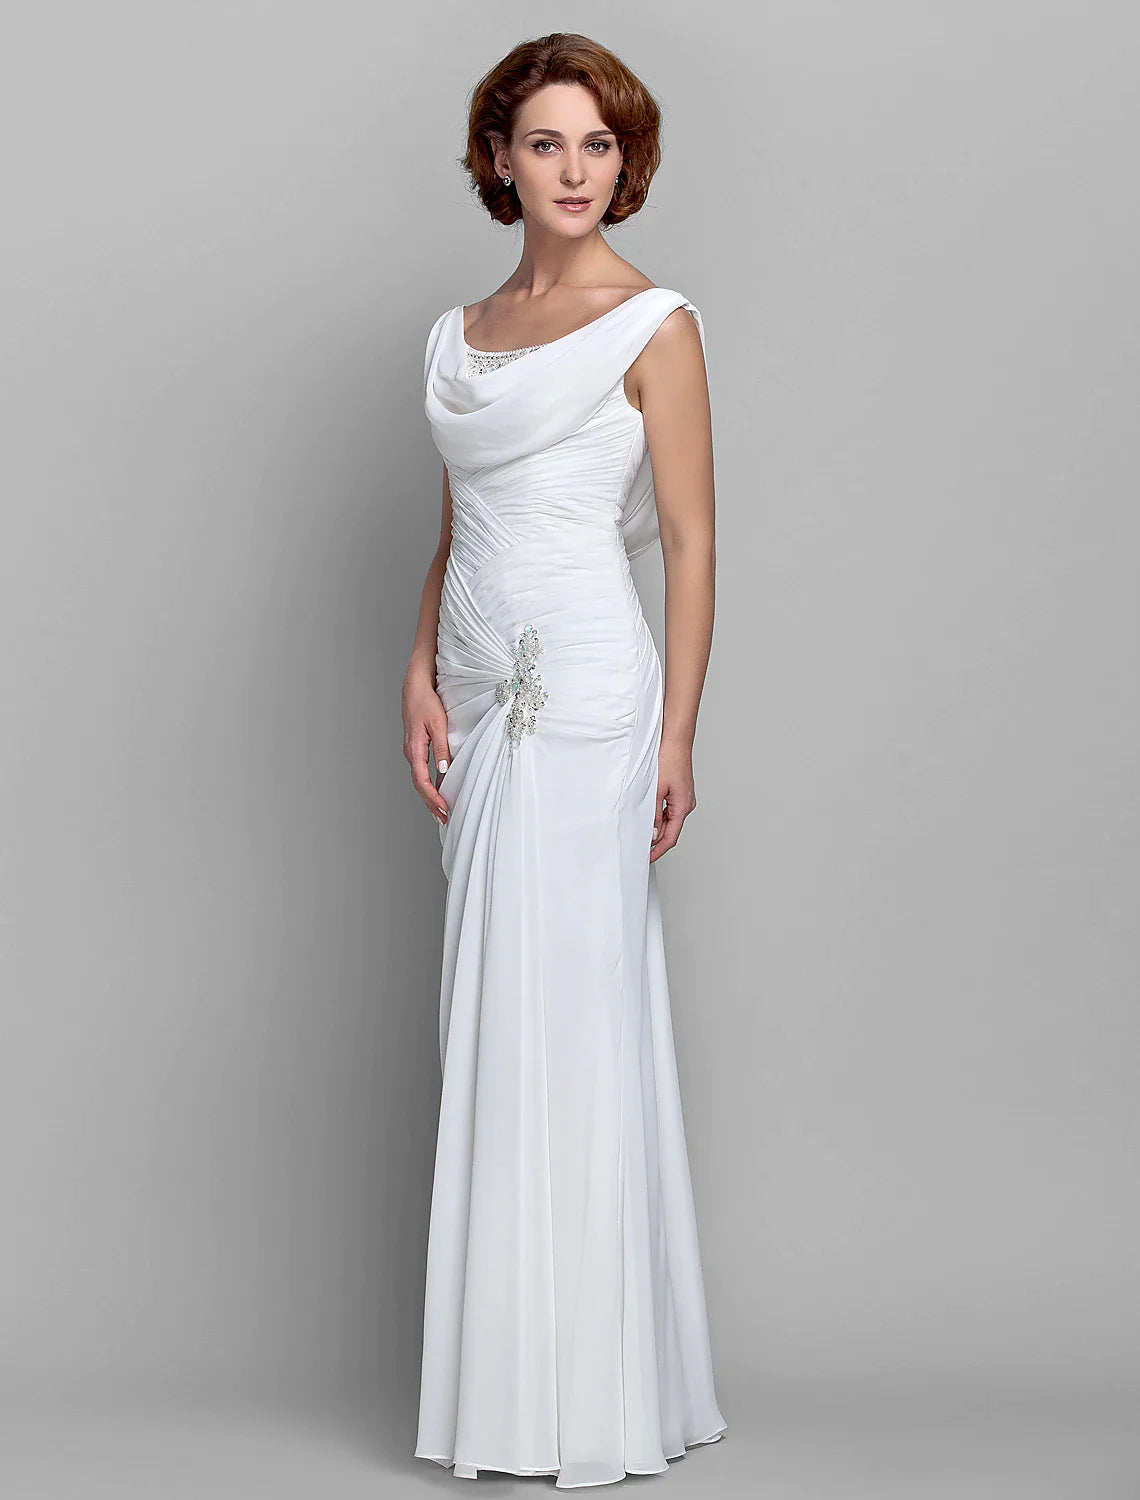 Sheath / Column Mother of the Bride Dress Vintage Inspired Cowl Neck Floor Length Chiffon Sleeveless with Buttons Criss Cross Crystals